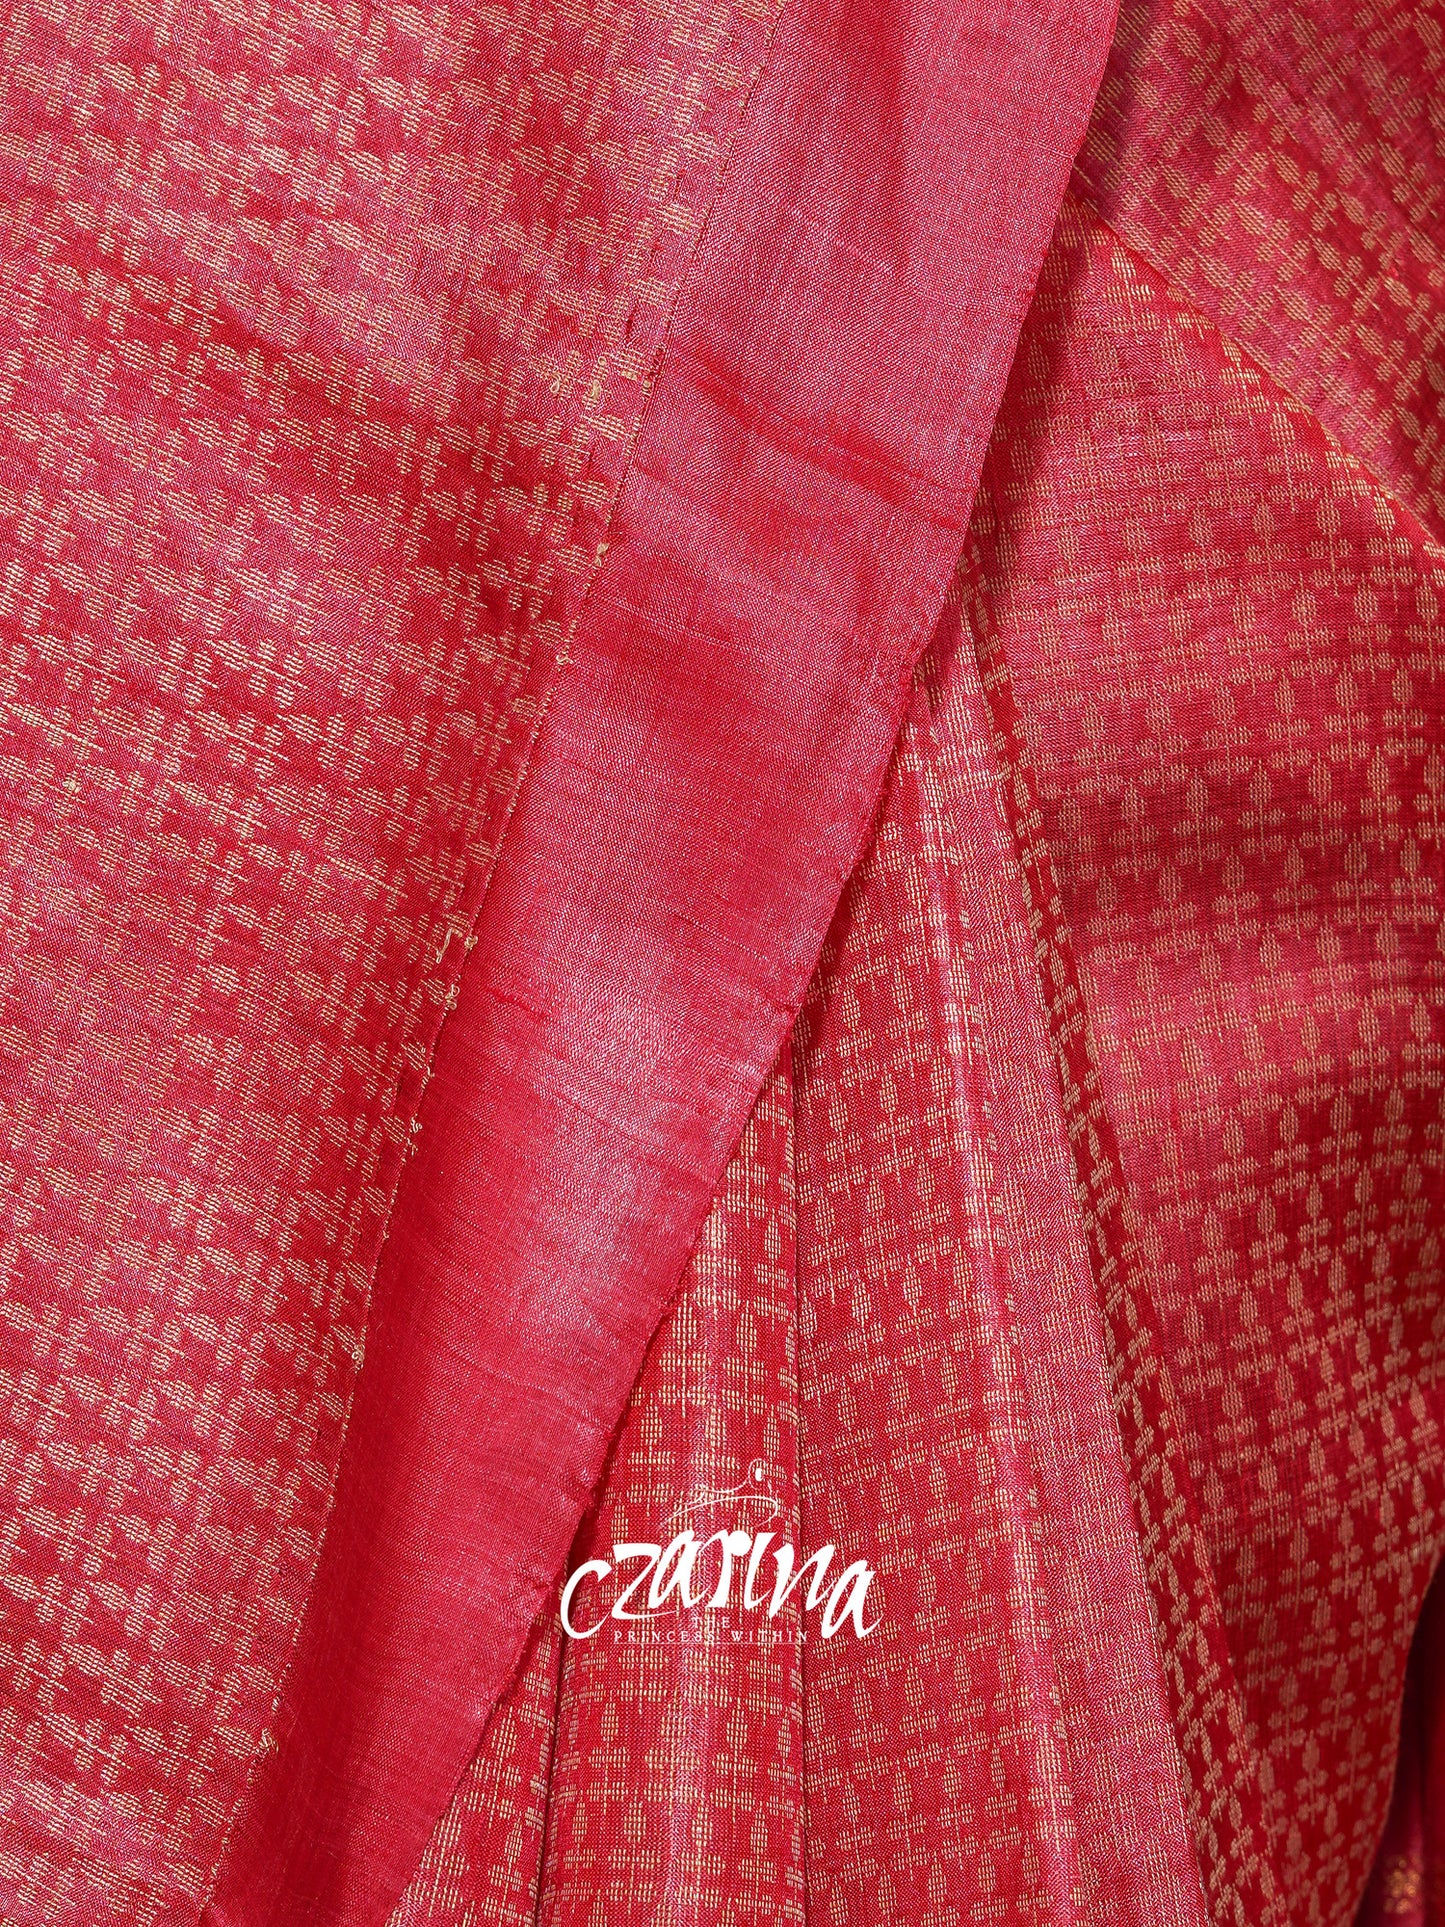 LIGHT RED WITH ALL-OVER WOVEN DESIGNS IN BEIGE TUSSAR SILK SAREE